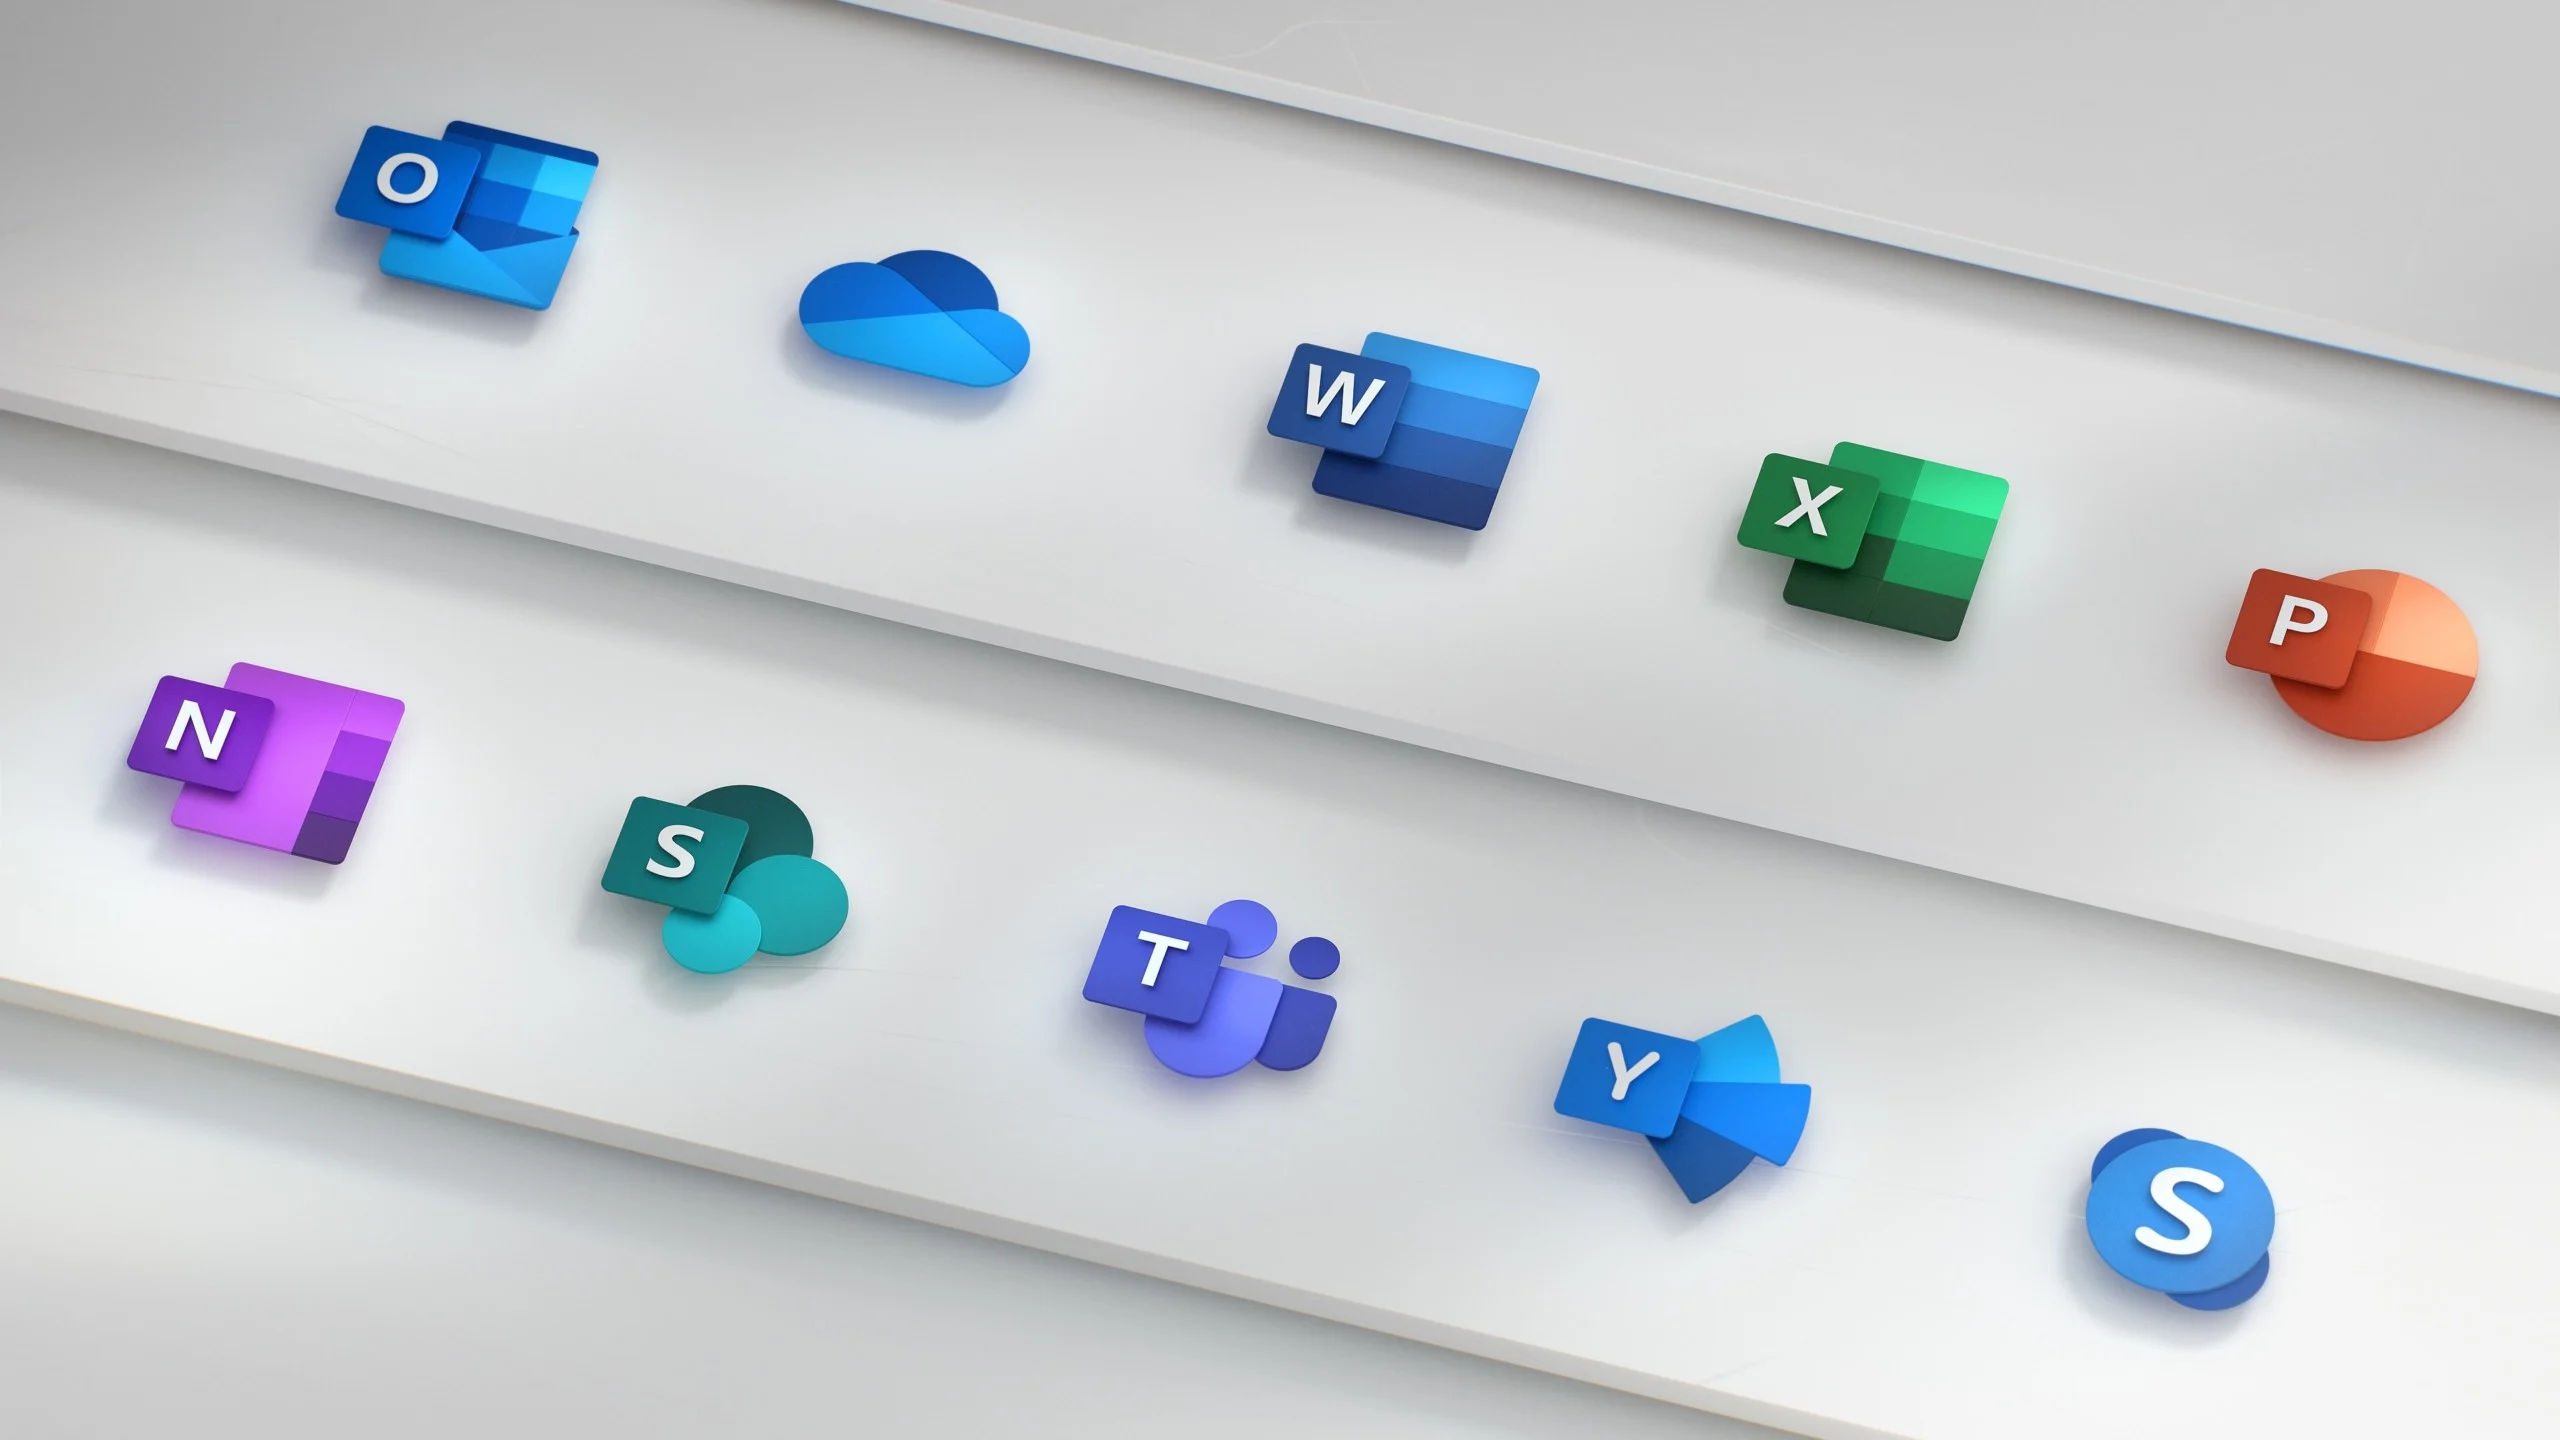 Microsoft Office 365: Familiar Tools with Cloud Integration